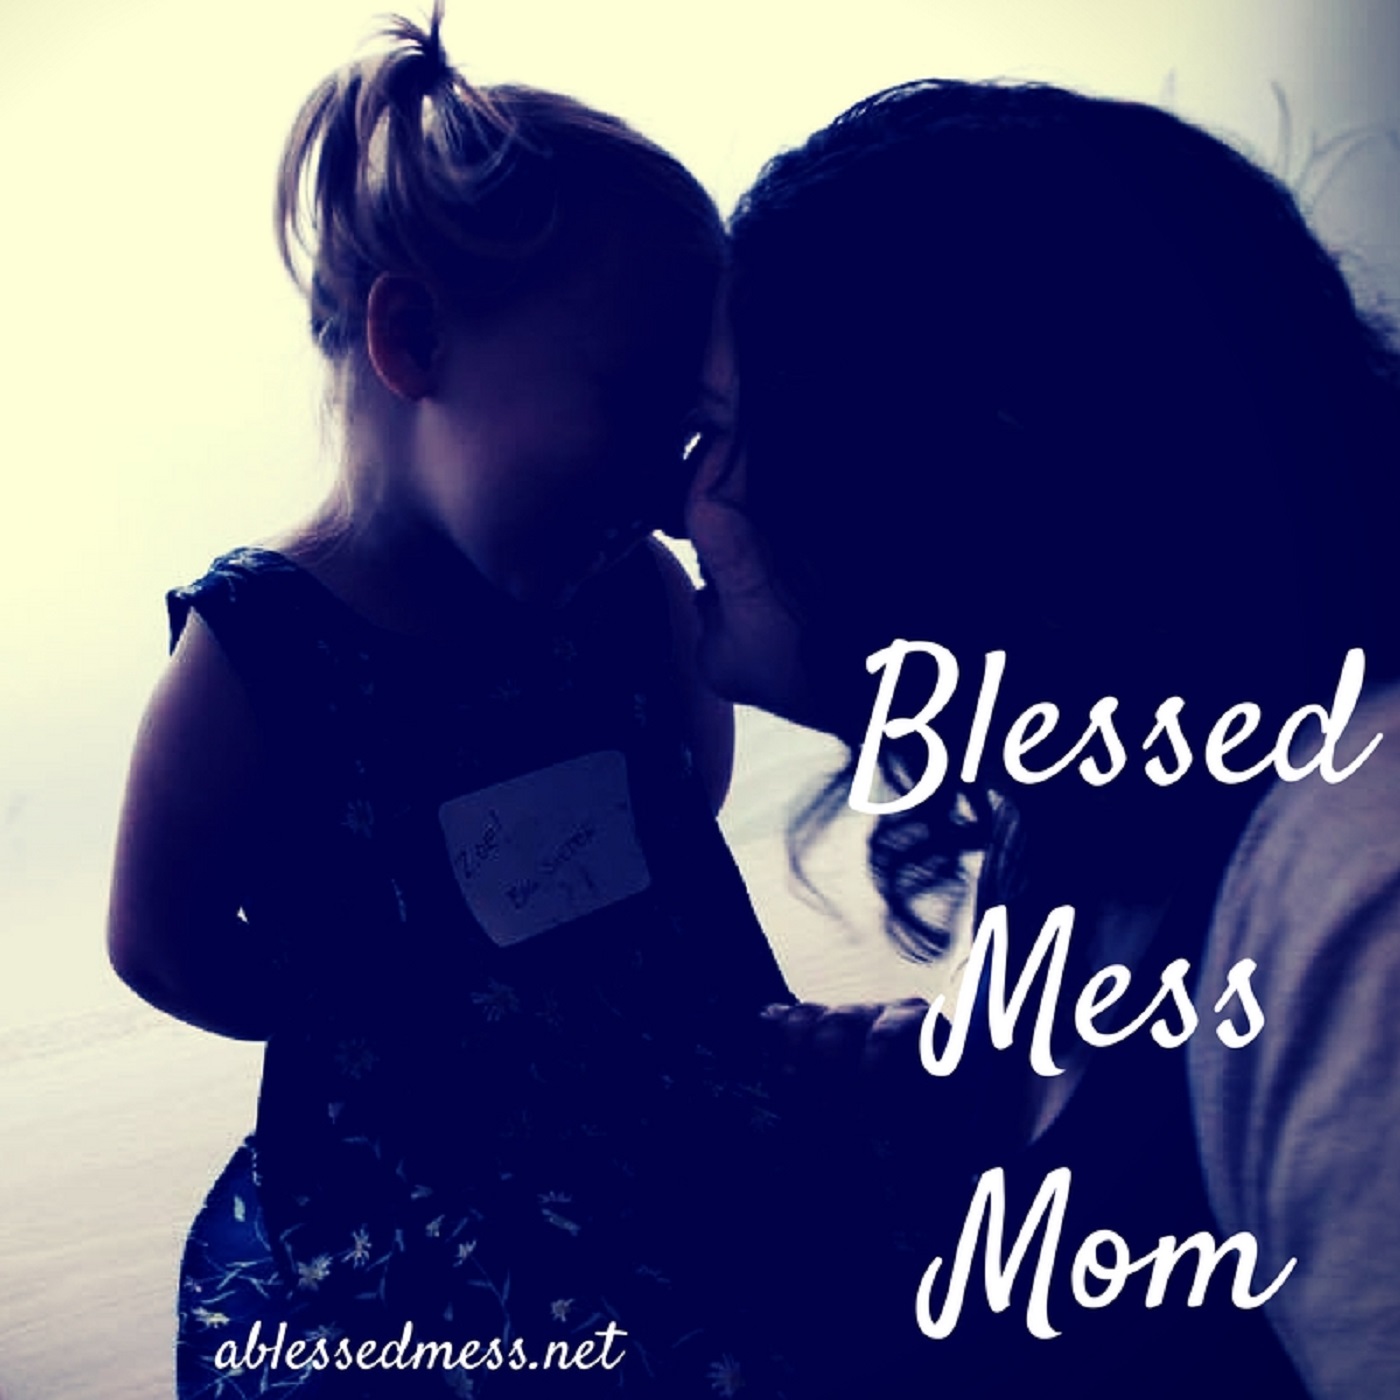 Blessed Mess Mom 3-31-18 Easter